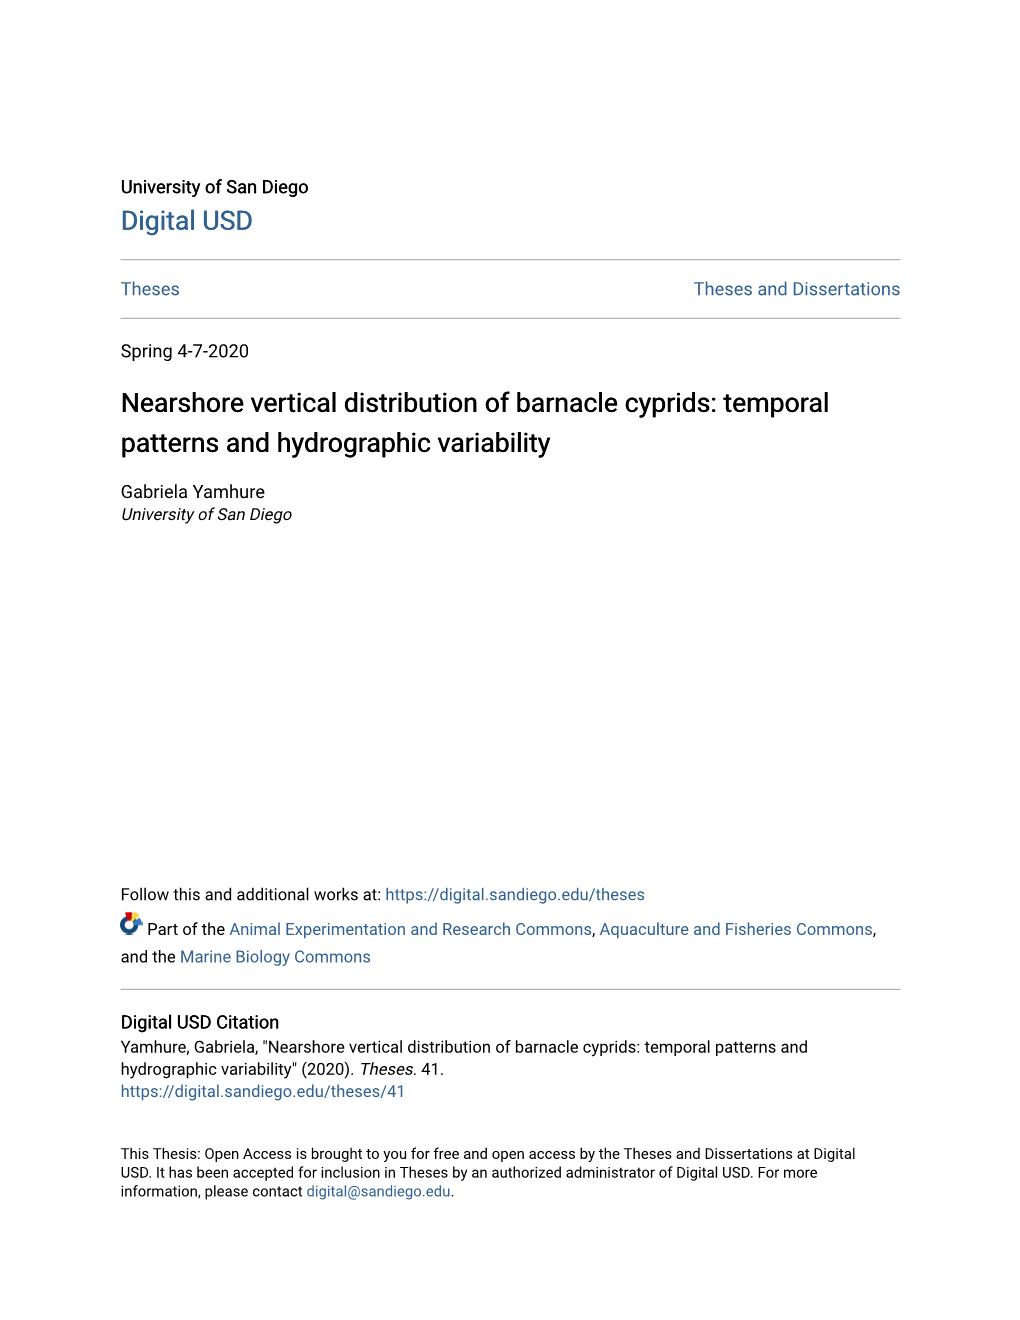 Nearshore Vertical Distribution of Barnacle Cyprids: Temporal Patterns and Hydrographic Variability